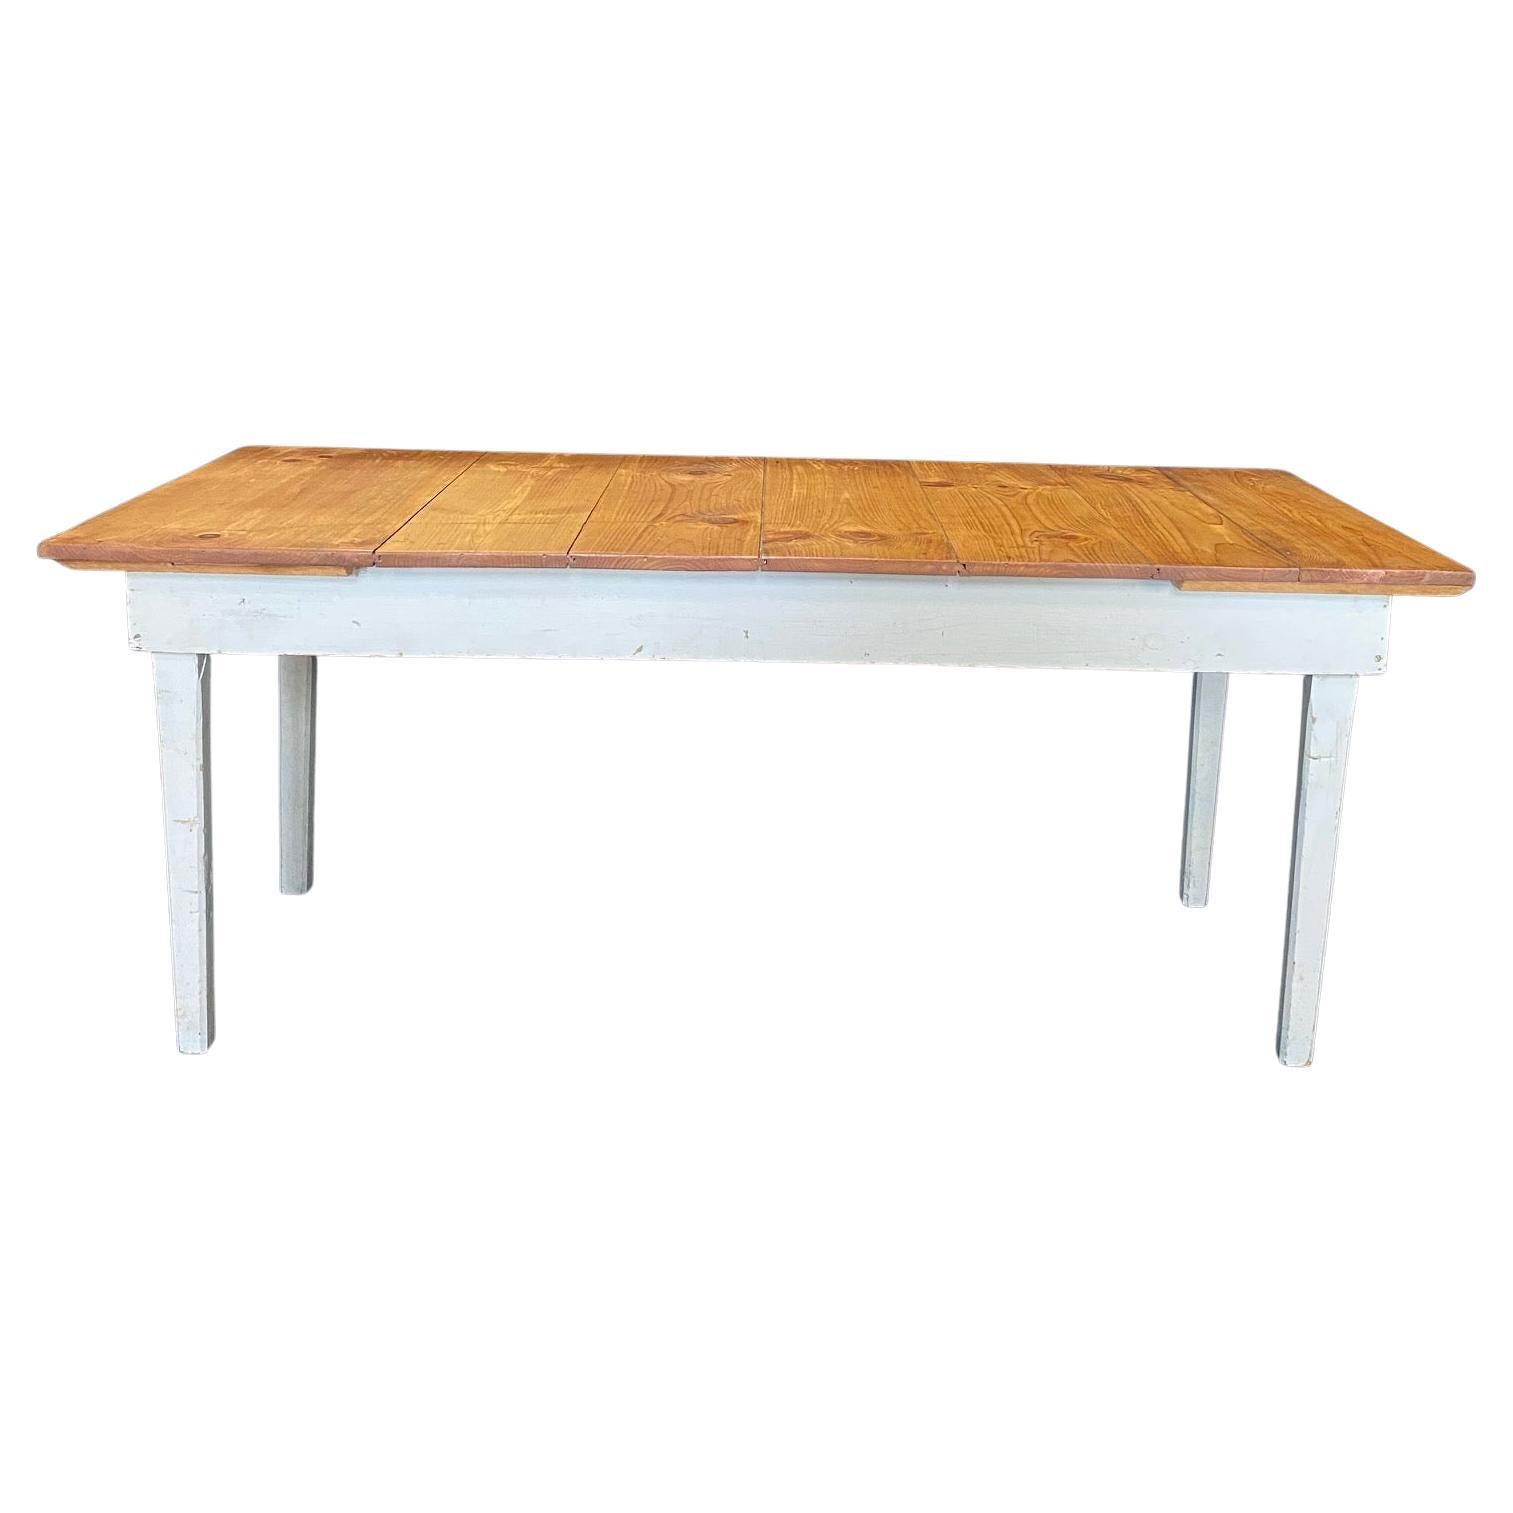 Rustic 19th Century Pine Farmhouse Dining Table from a Grange Hall in Maine For Sale